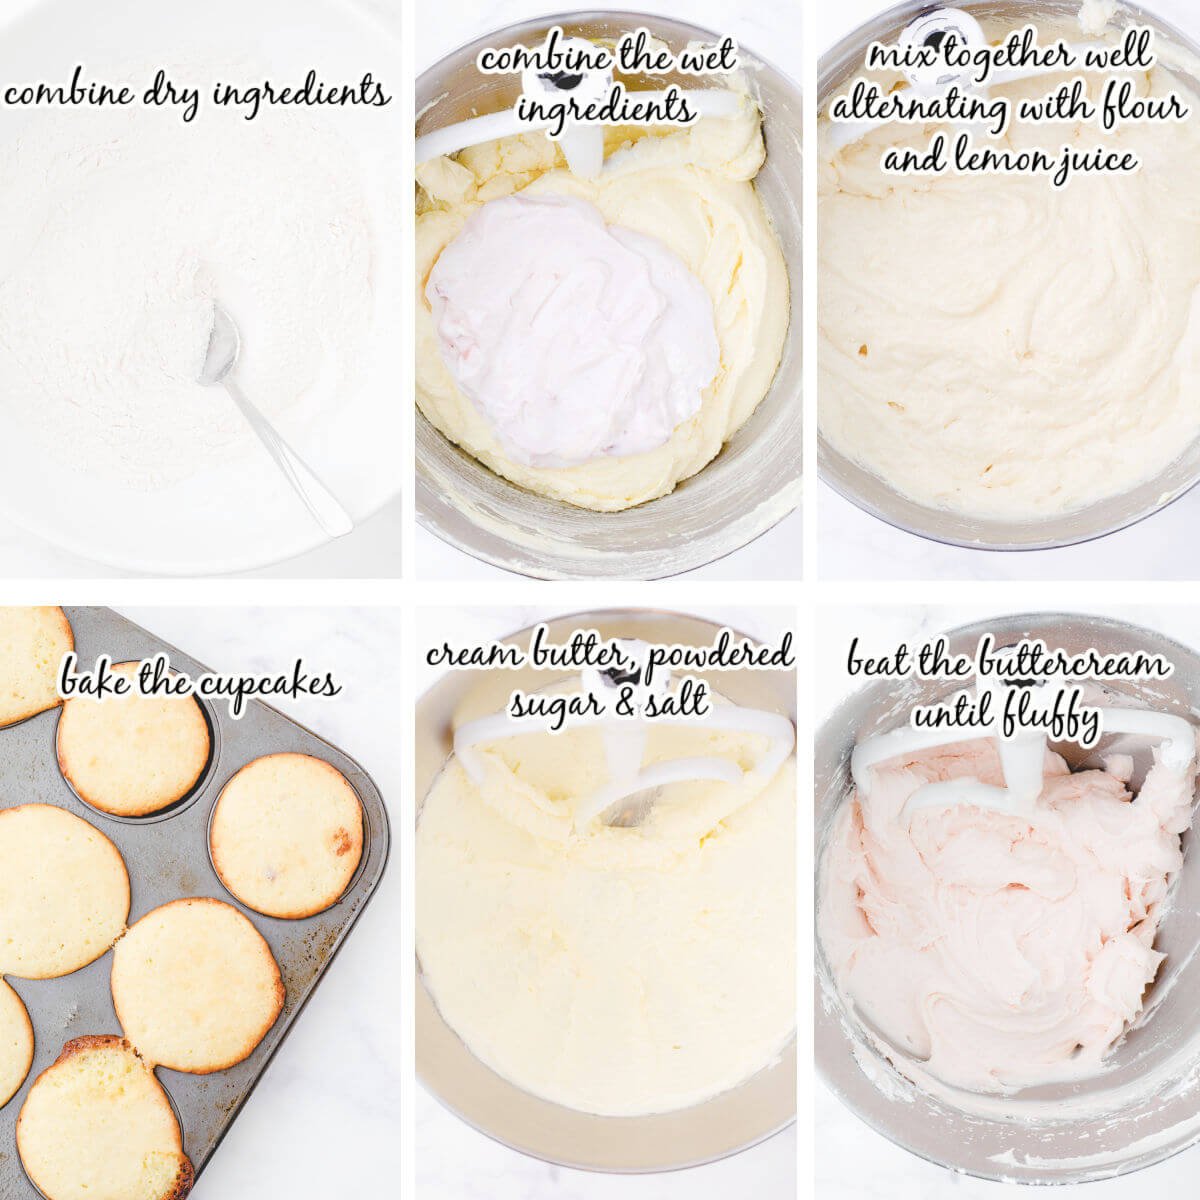 Step by step instructions to make cupcake recipe, with print overlay.